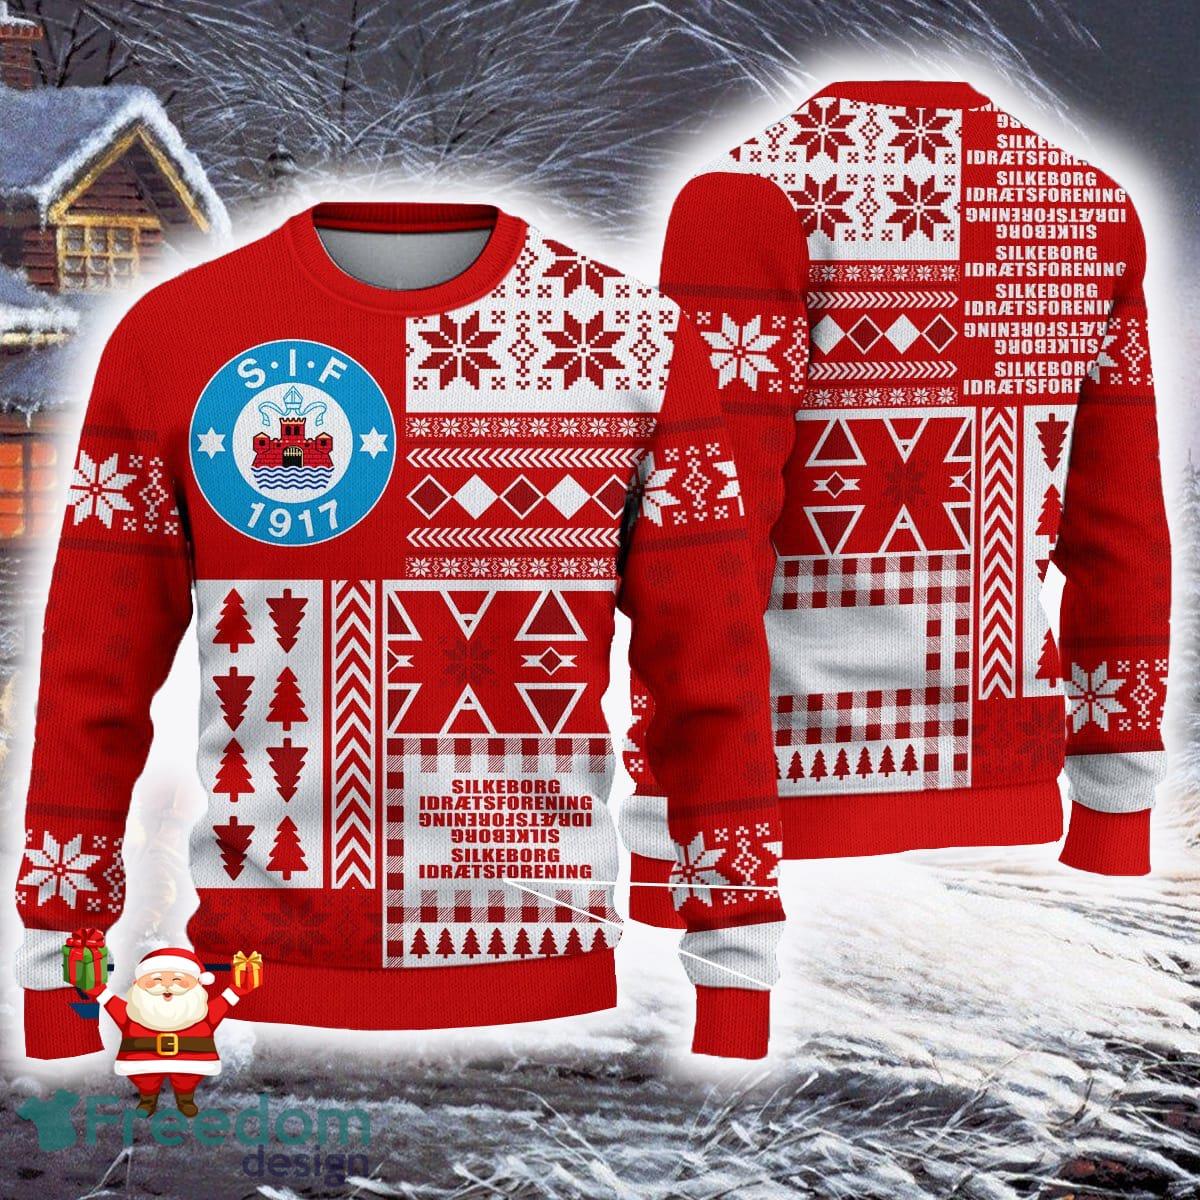 The best selling] welder skull all over printed ugly christmas sweater